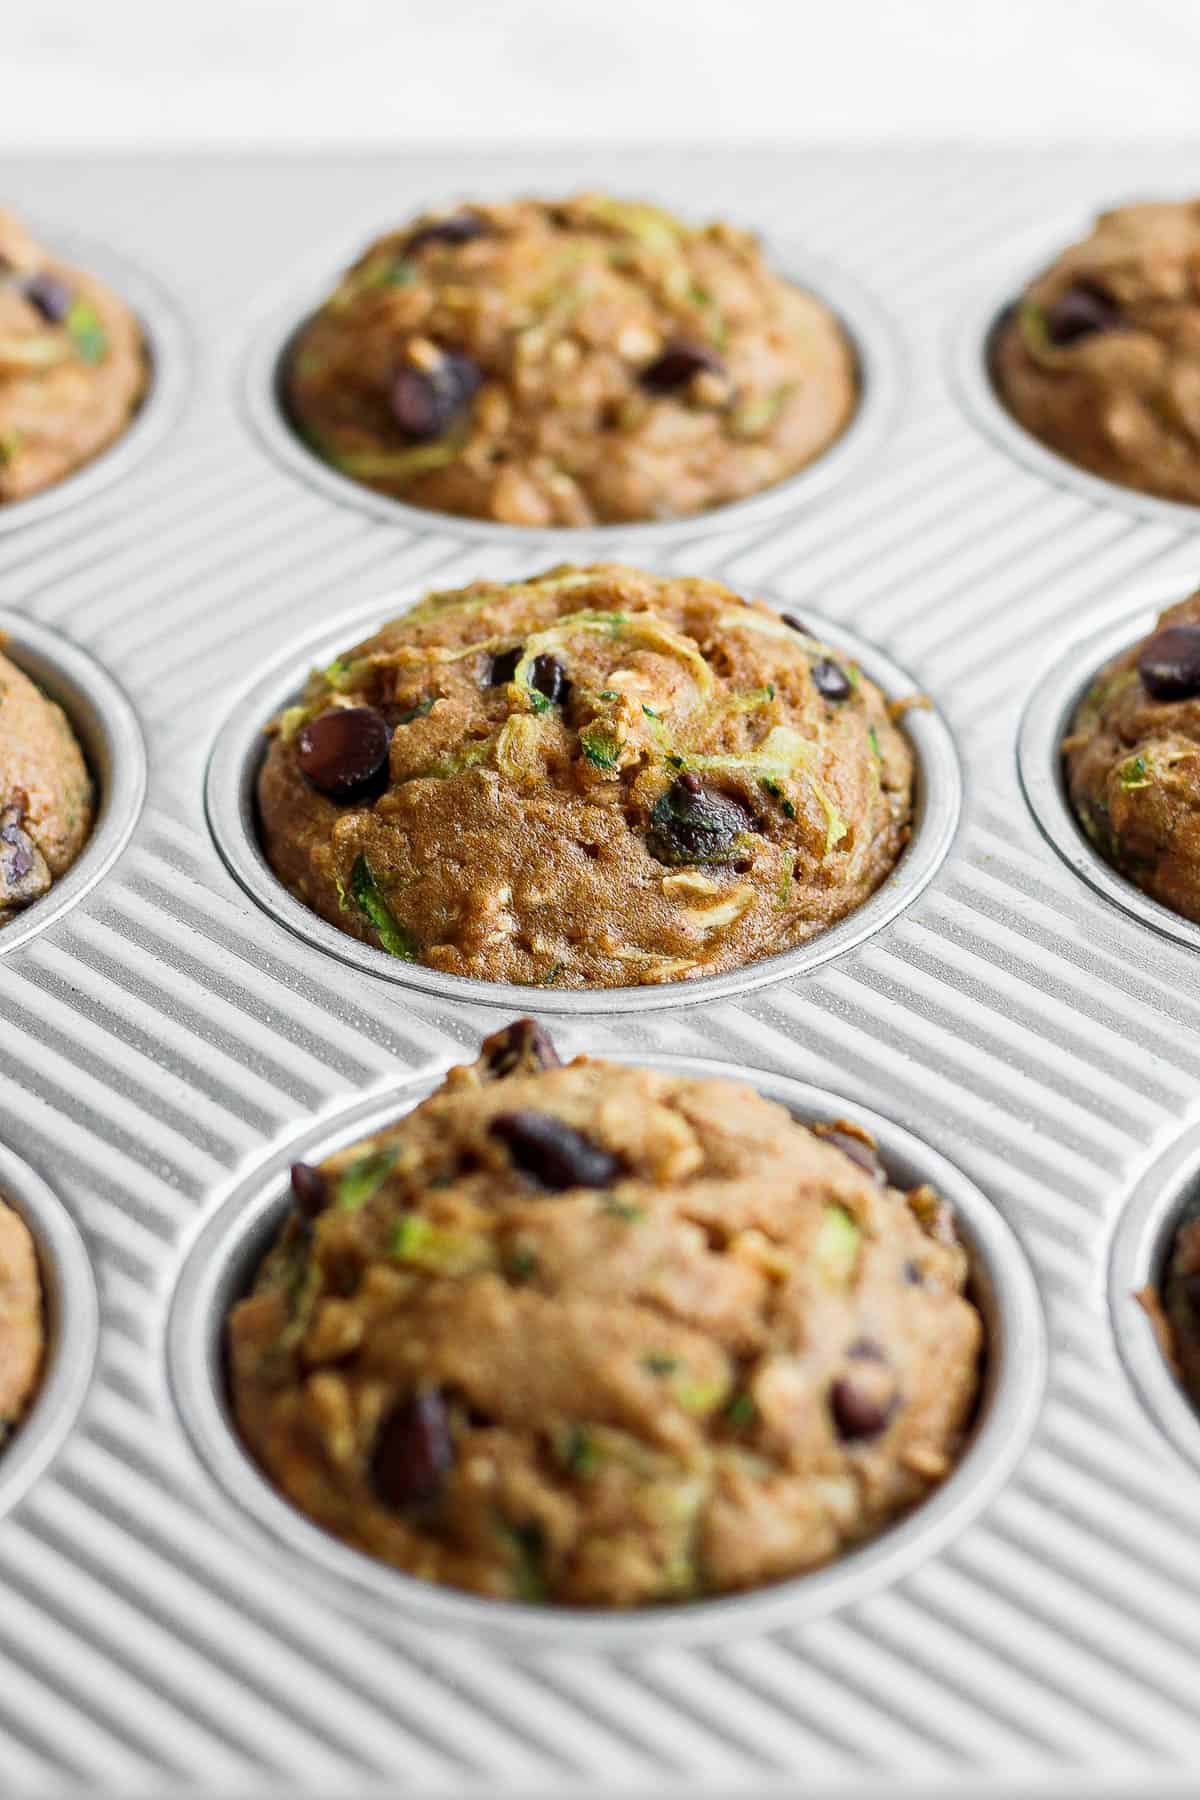 Baked muffins in muffin tins.